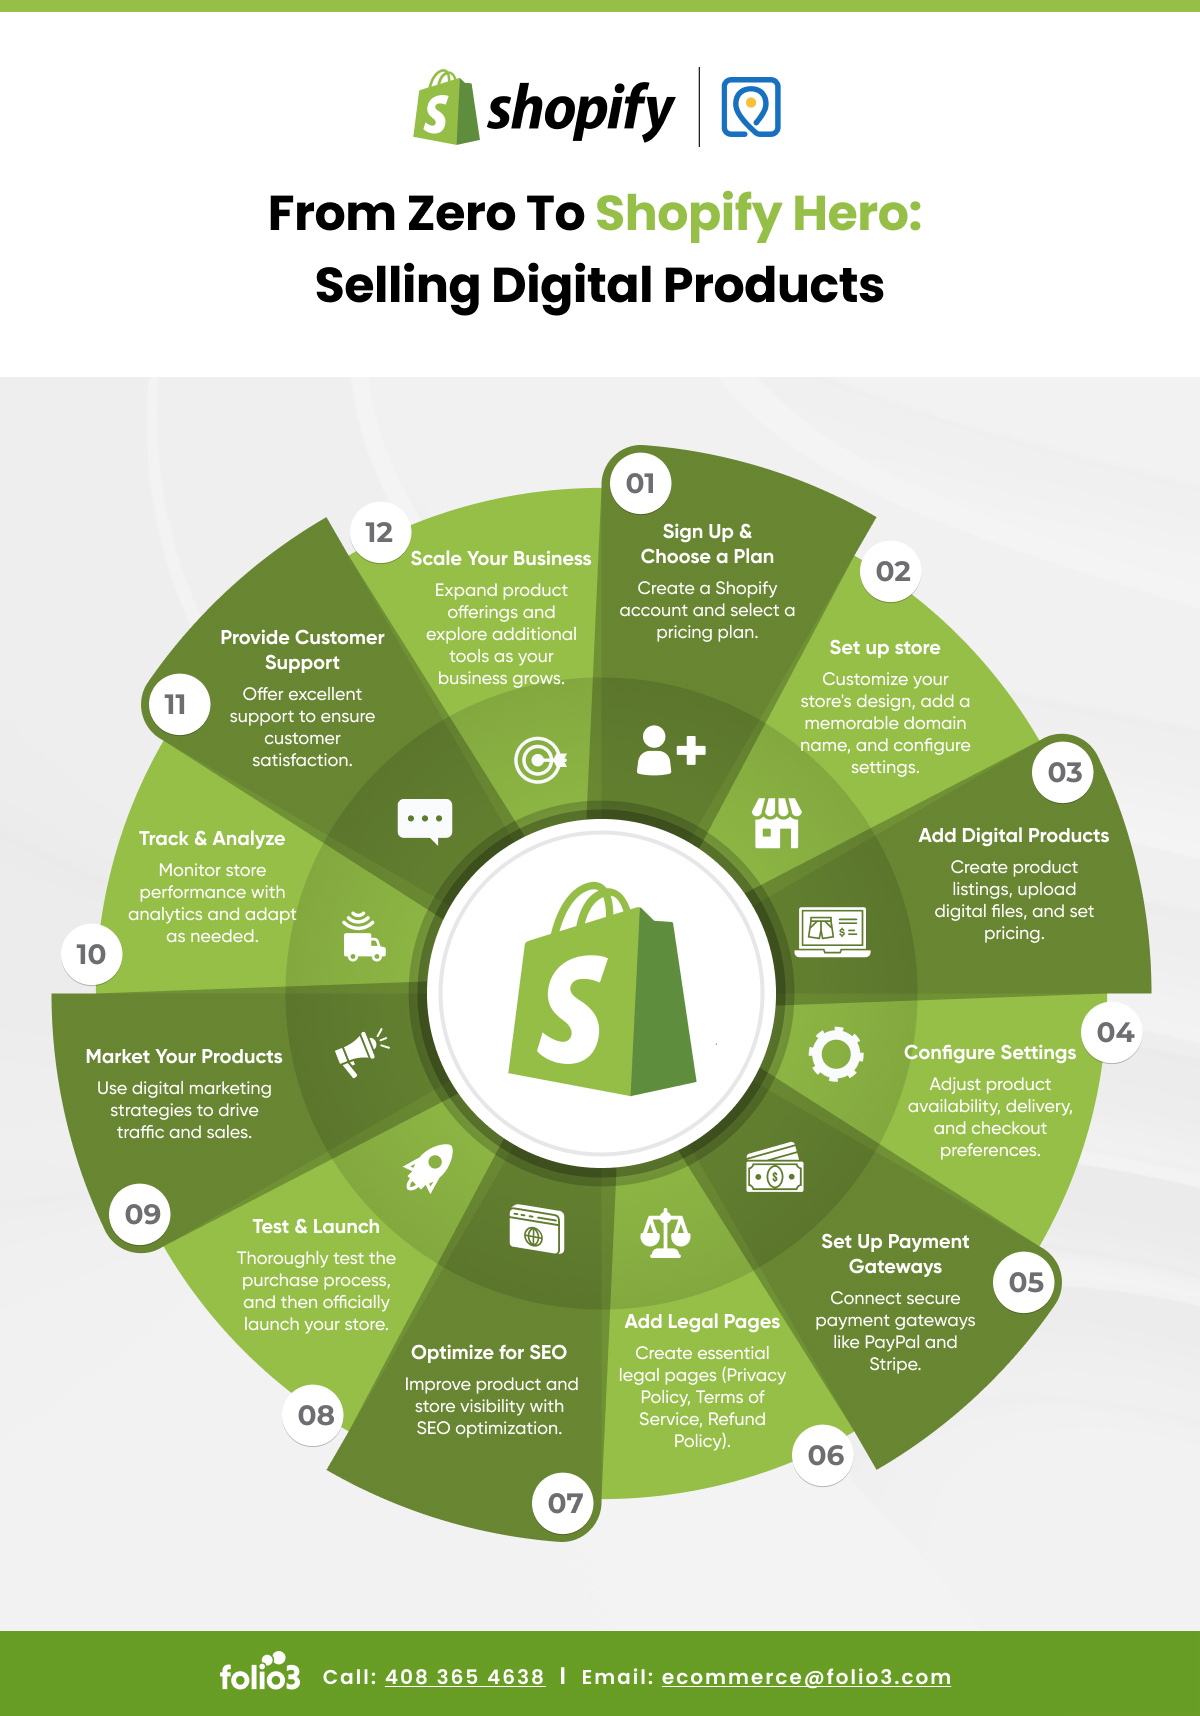 From Zero to Shopify Hero - Selling Digital Products